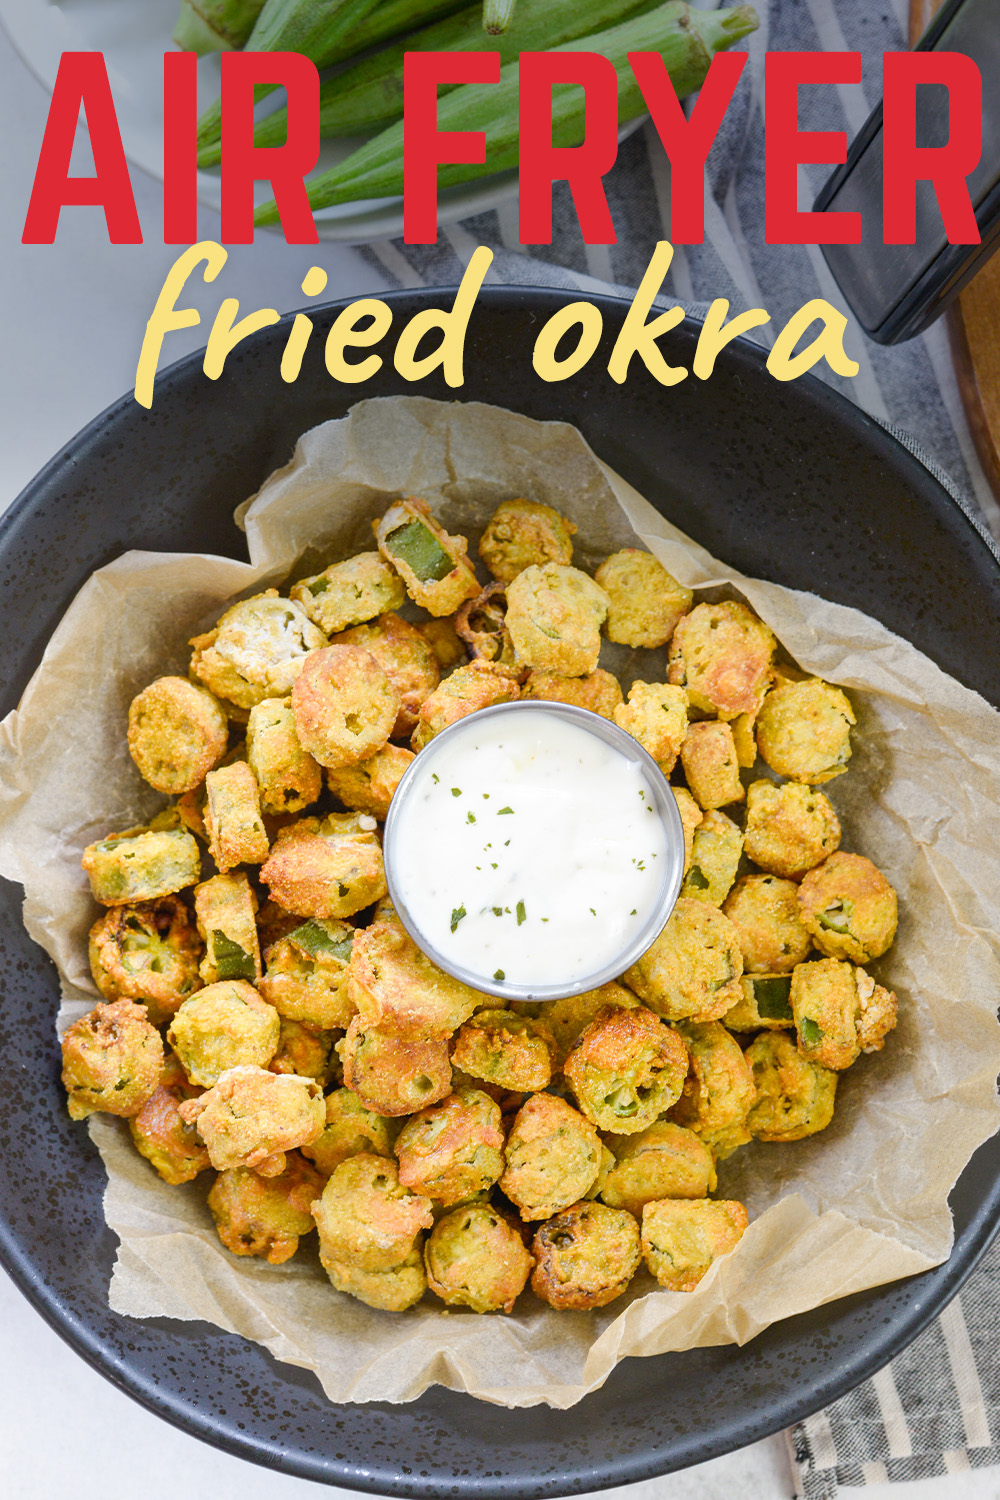 This healthy side dish is made in the air fryer!  If you are looking for a new snack, you could also use this air fryer okra recipe for that!